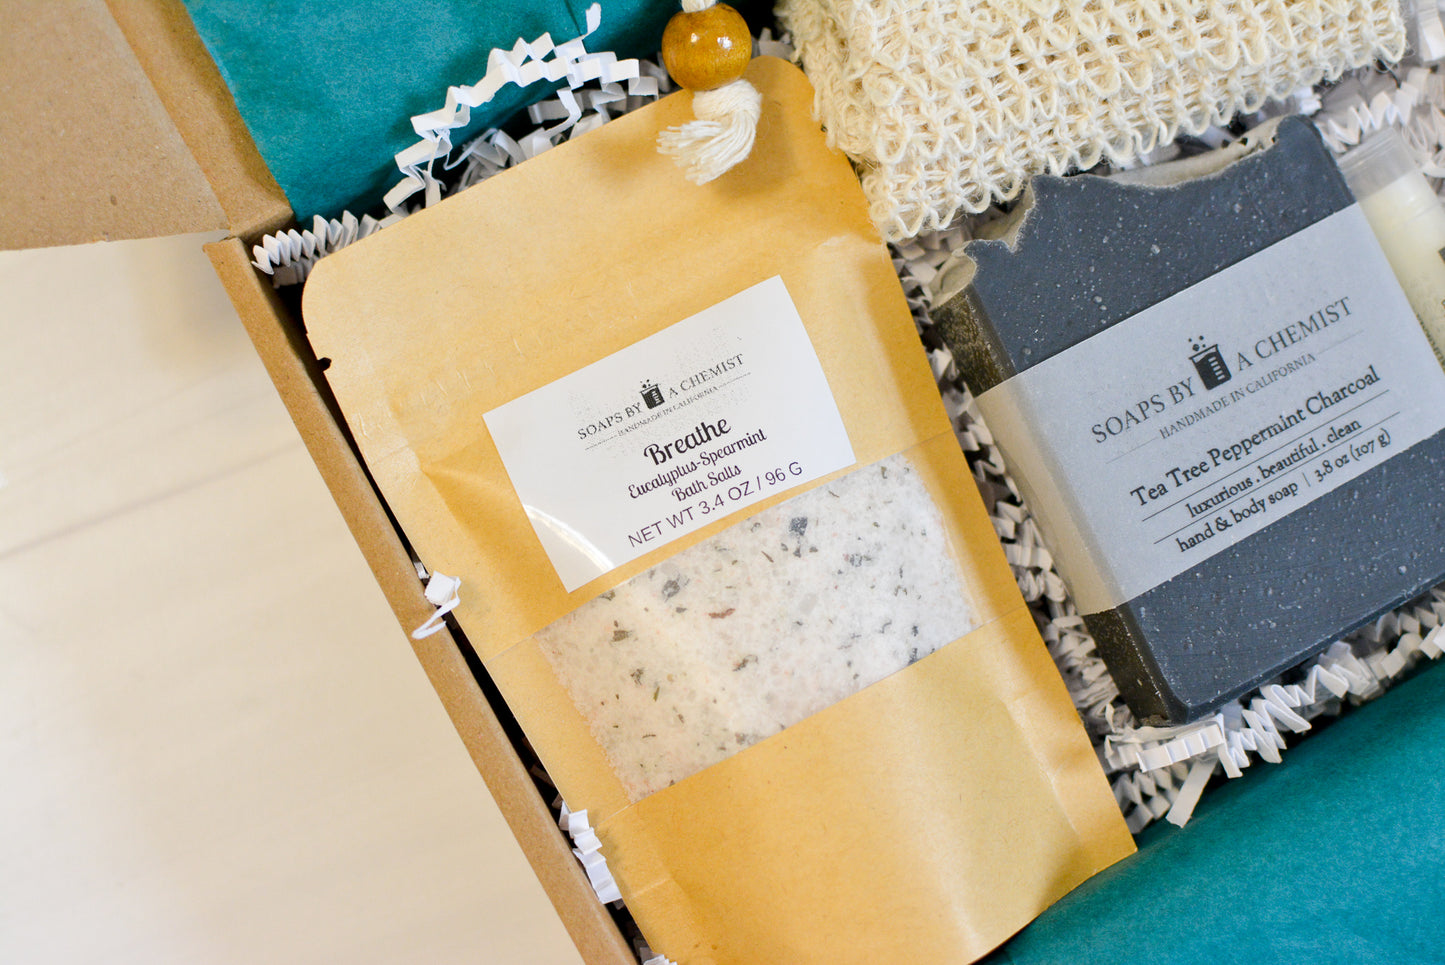 Relaxing Gift Sets with Handmade Soap and Bath Salts